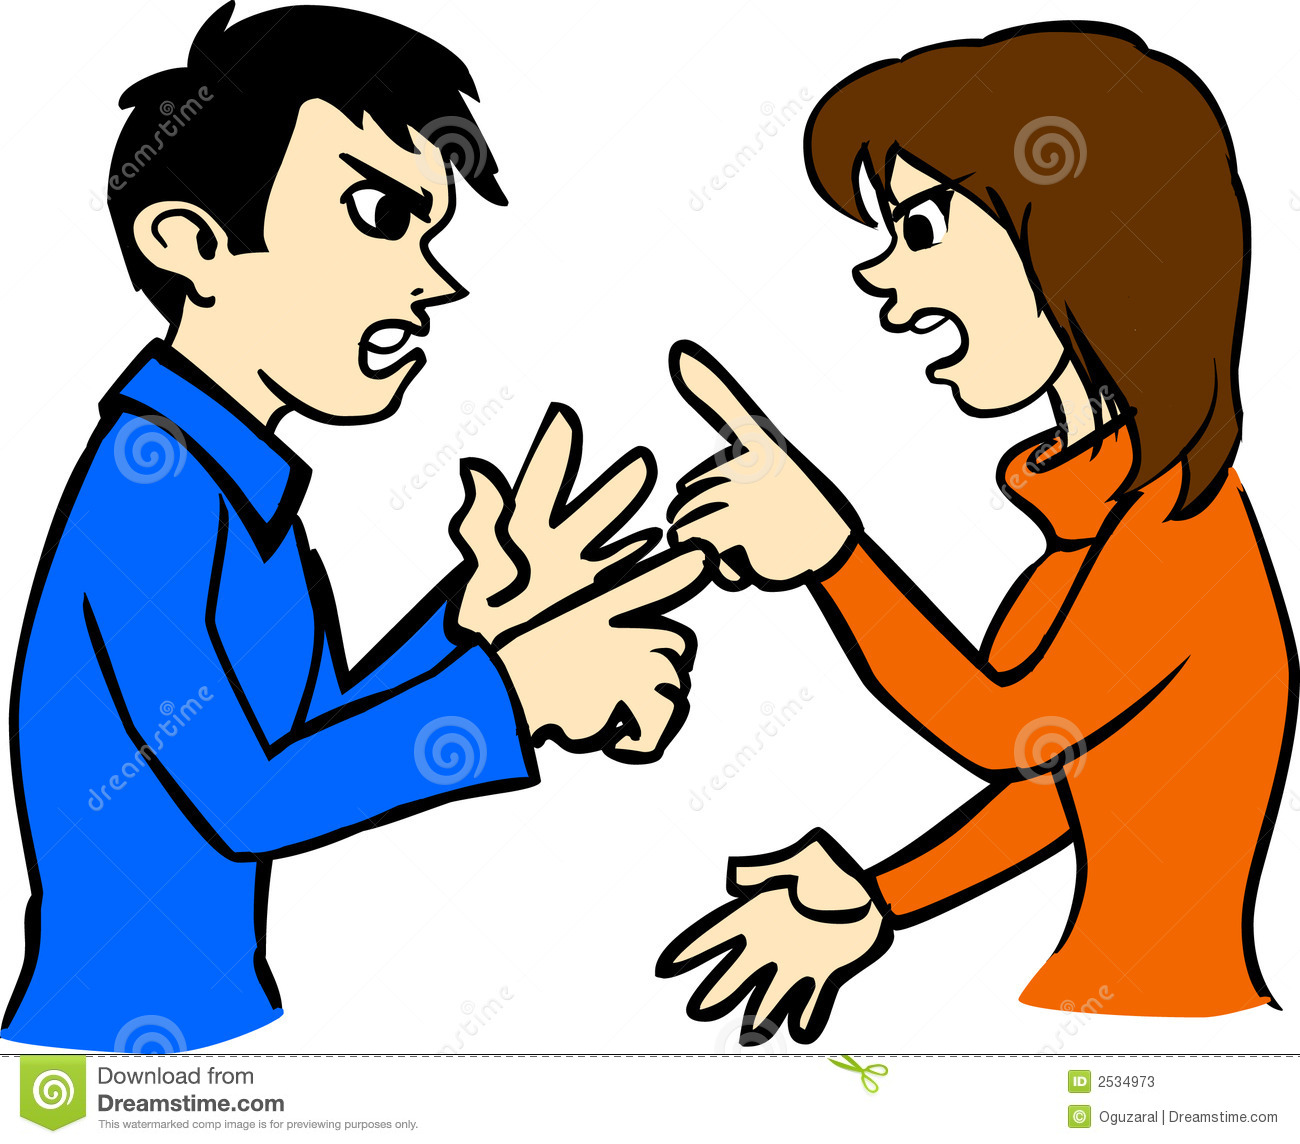 Fighting clipart quarrel. People images free download